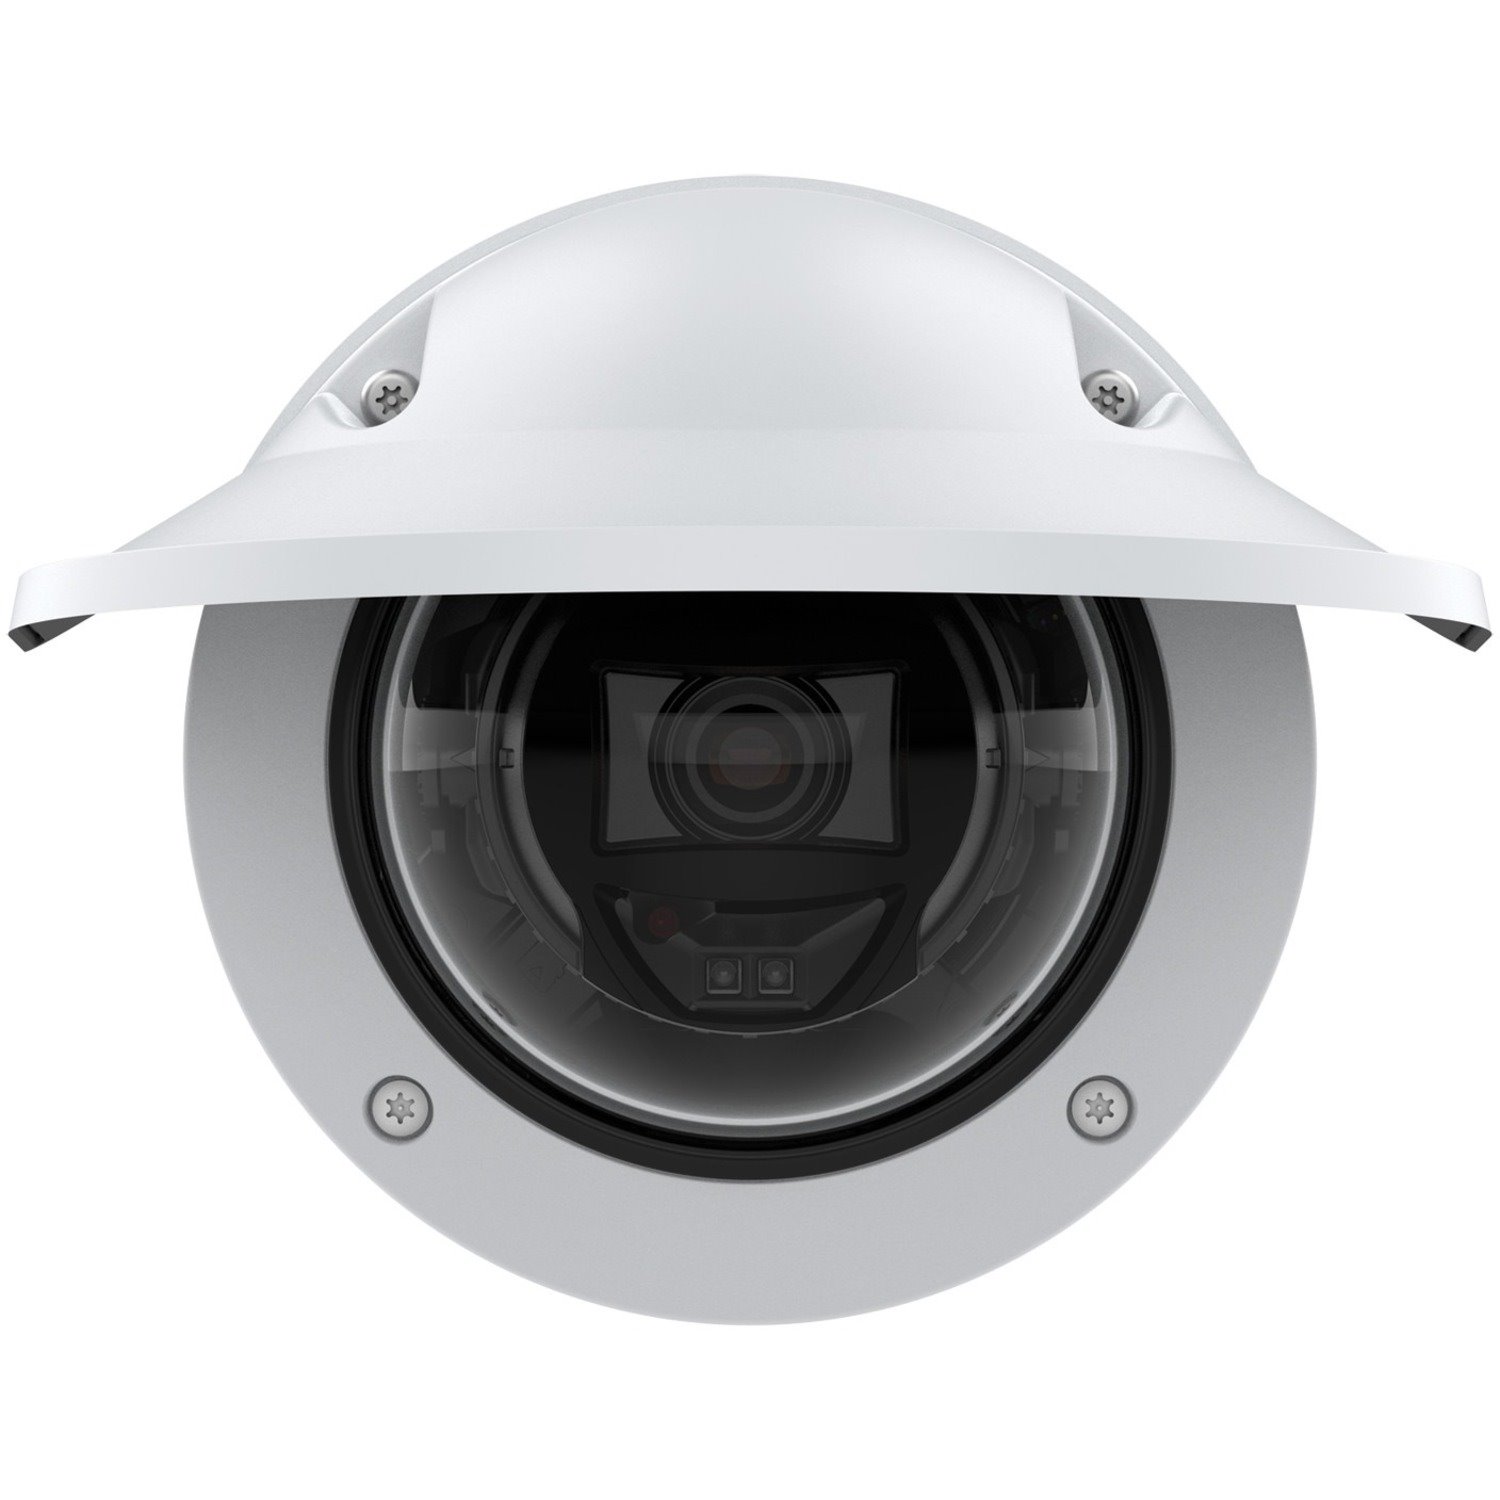 AXIS P3265-LVE 2 Megapixel Outdoor Full HD Network Camera - Color - Dome